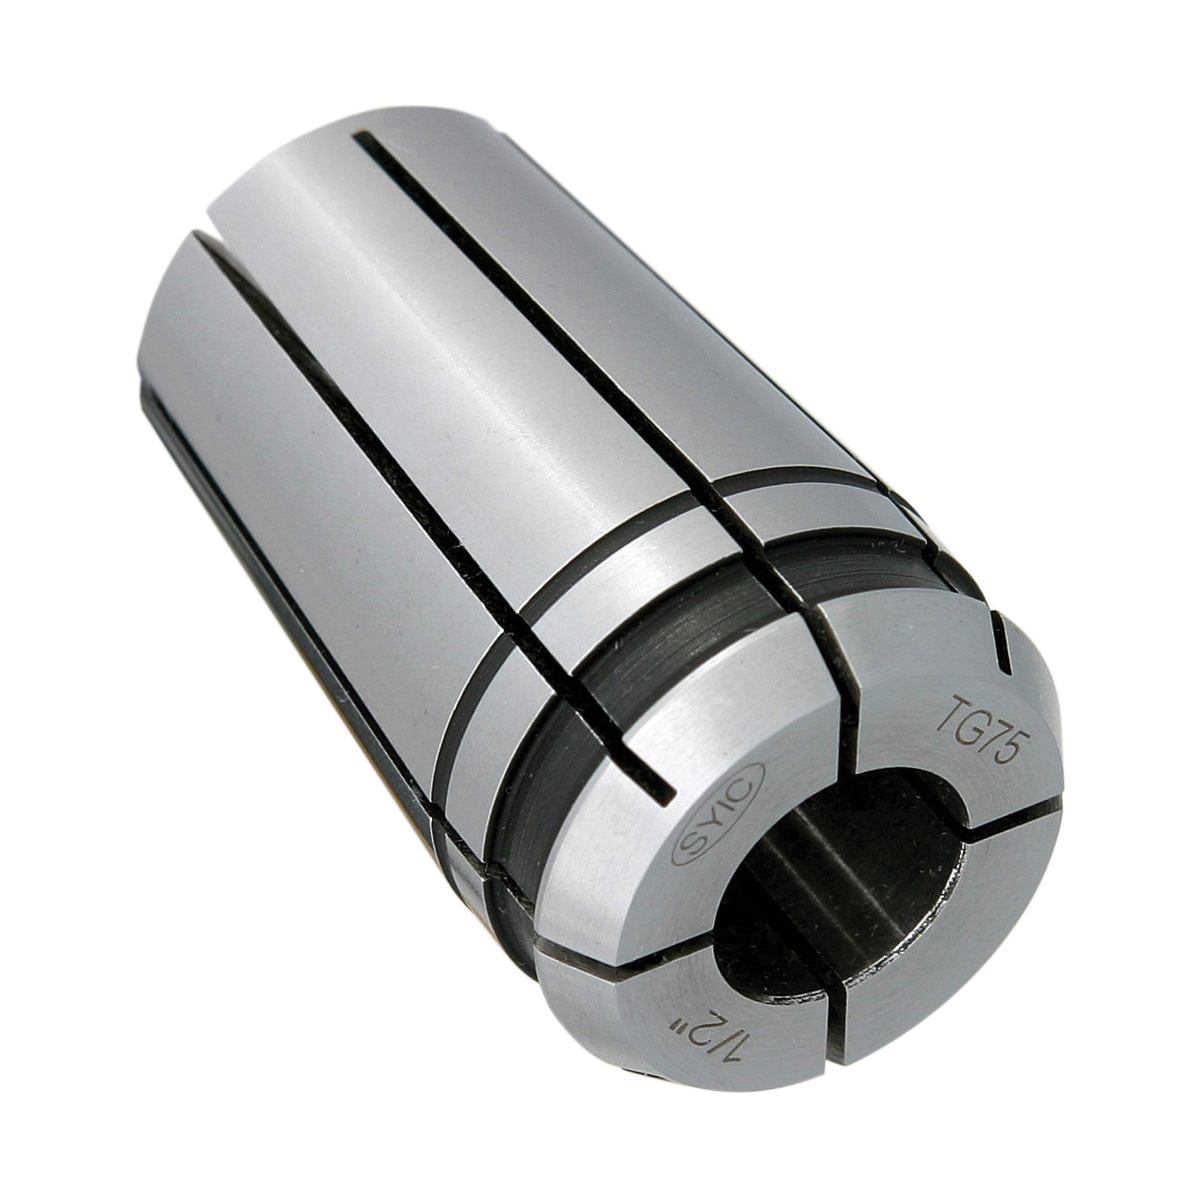 TG75 19/64" COLLET